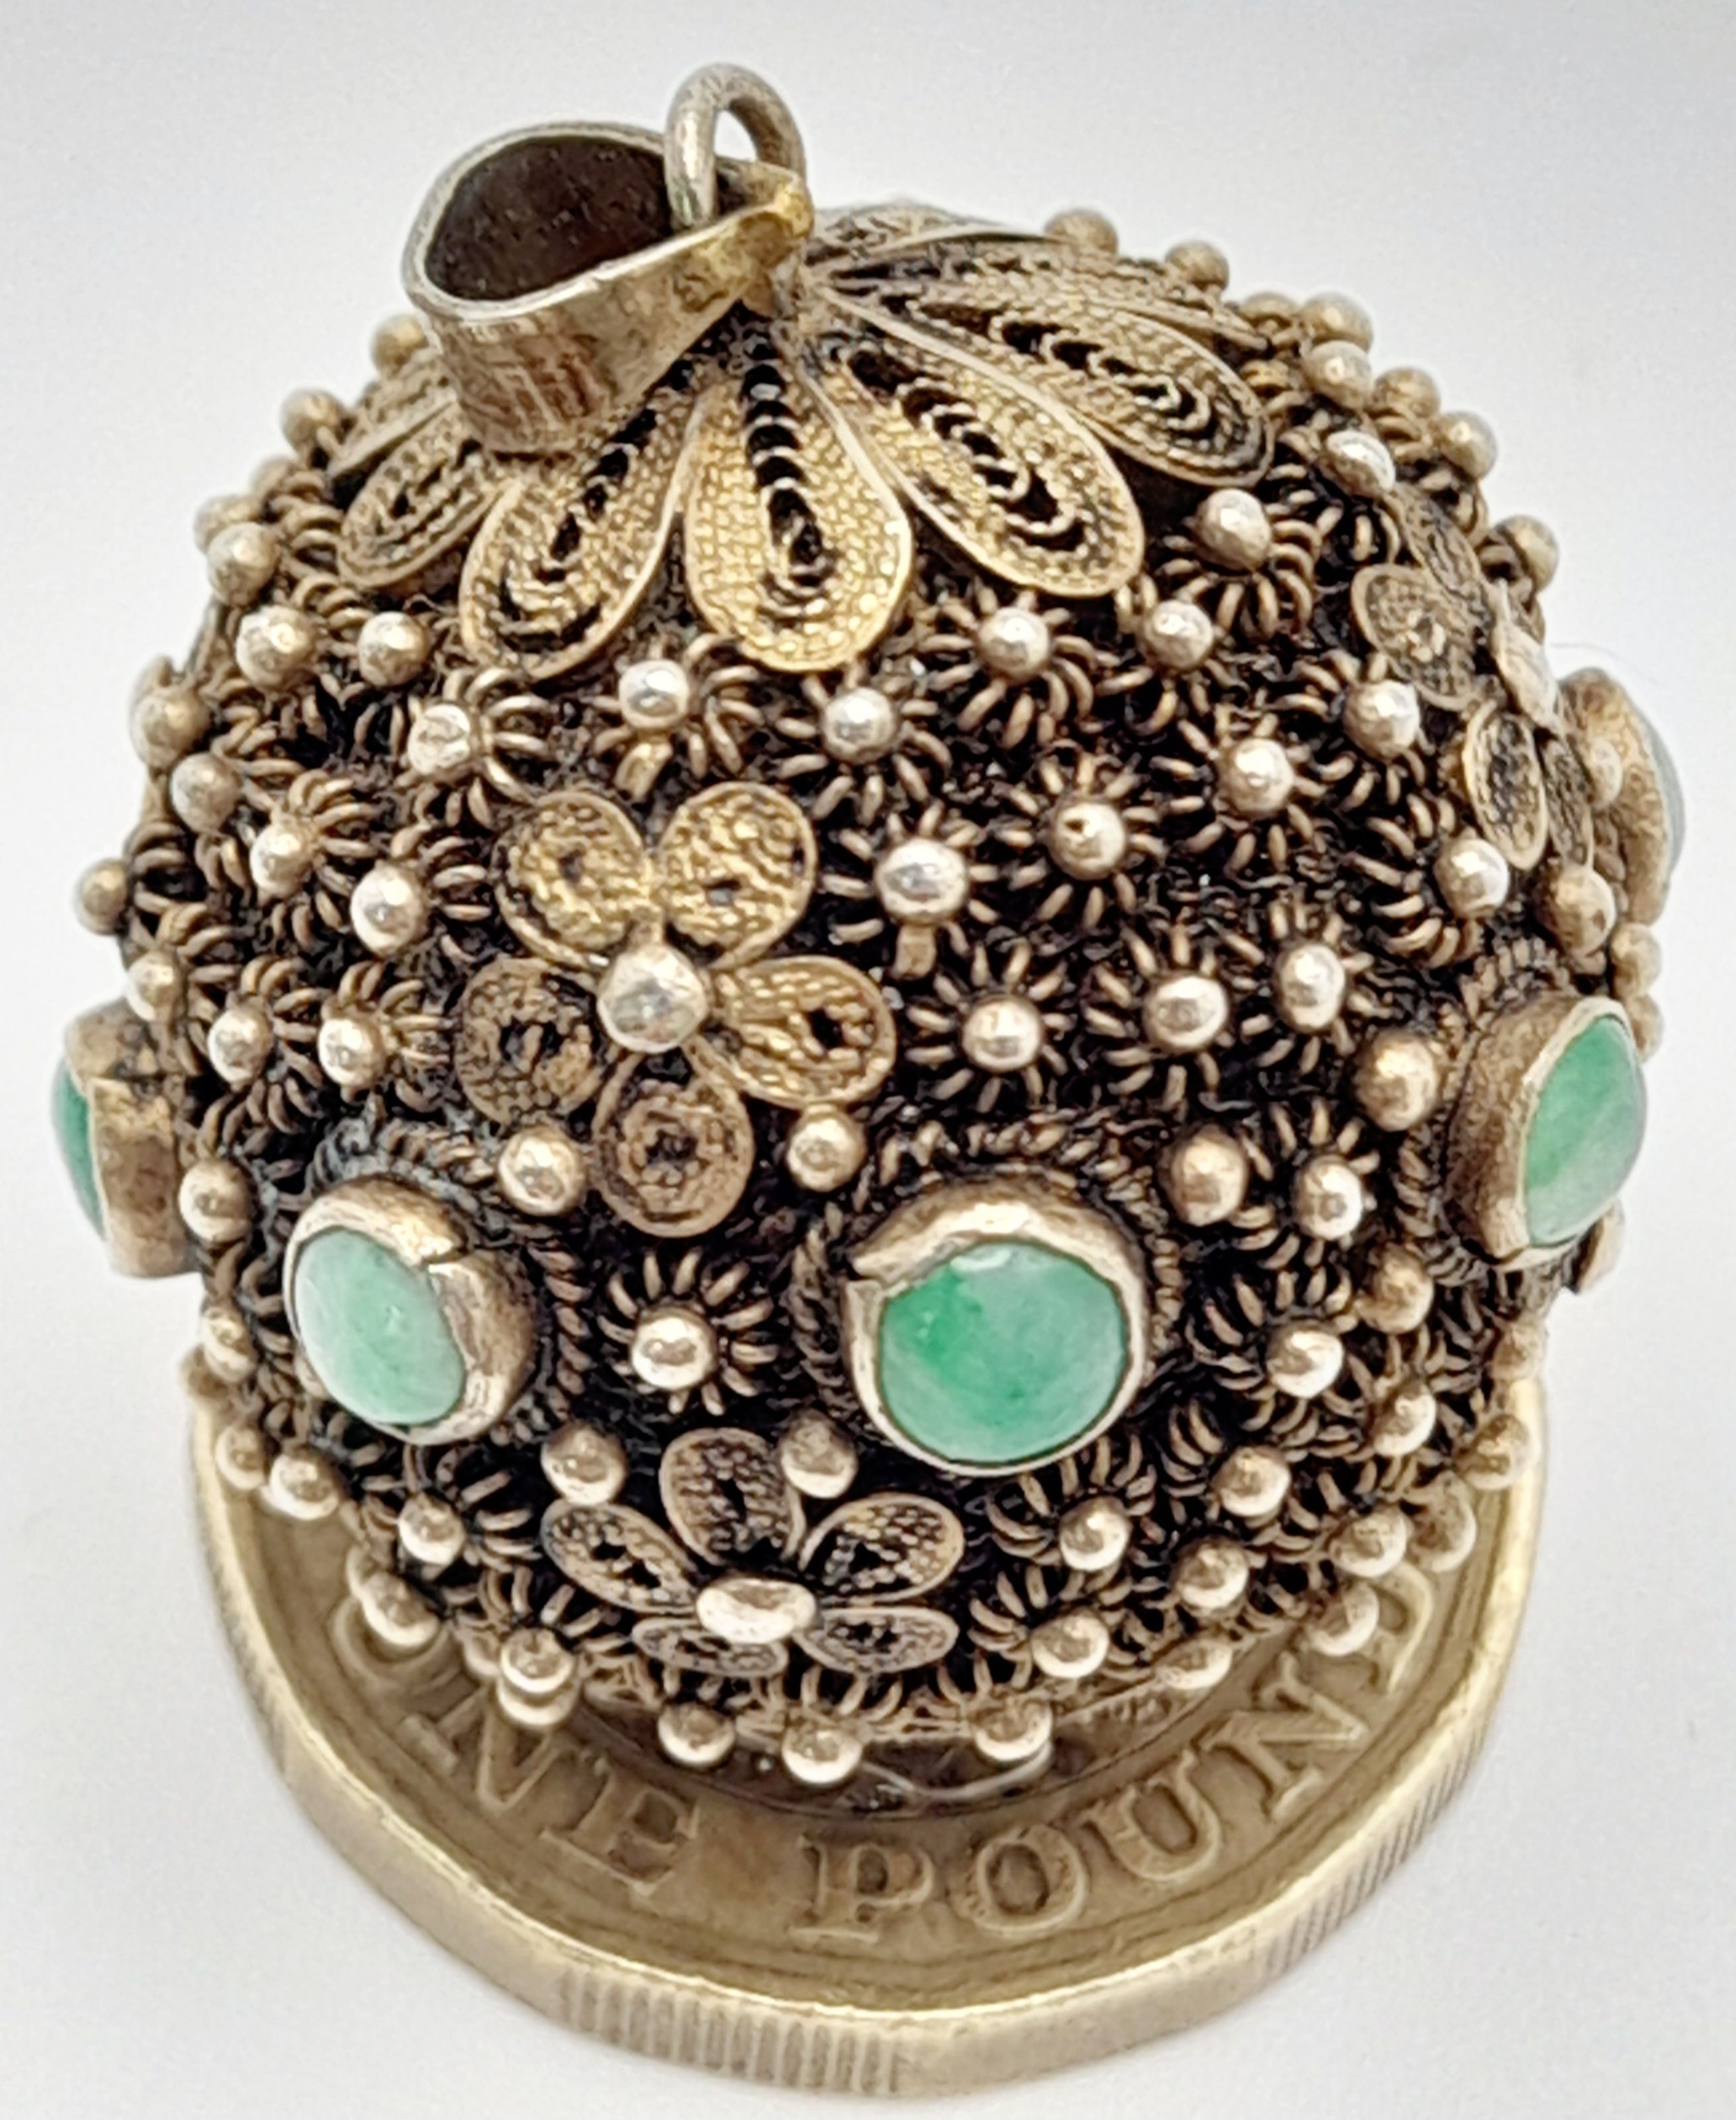 An Antique Gold Plated Silver Decorative Orb Pendant. Ornate filigree work with jade accents. 3.5cm. - Image 4 of 5